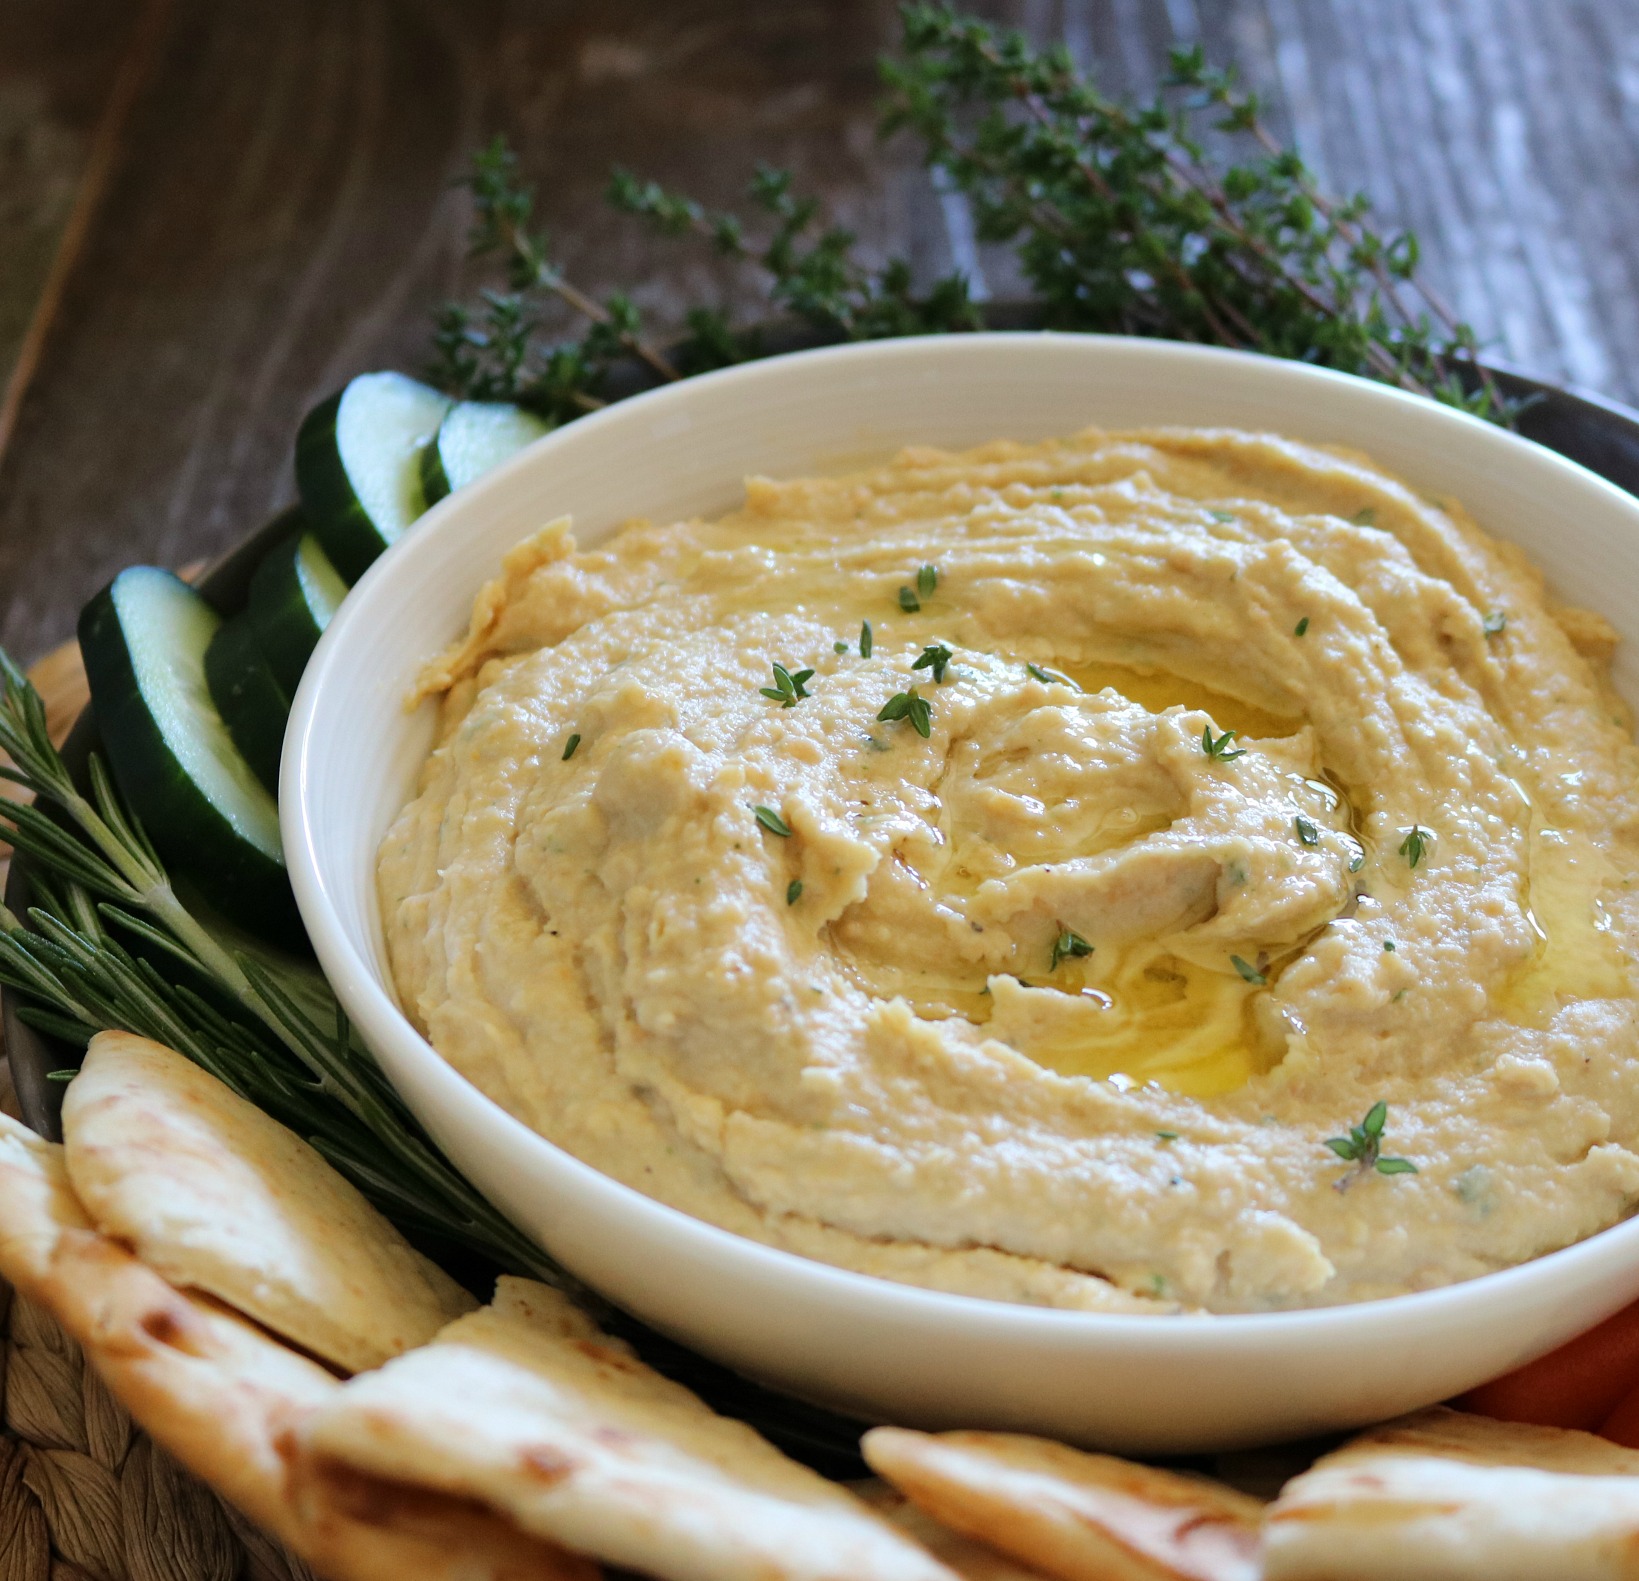 Rich and Creamy Herbed Hummus